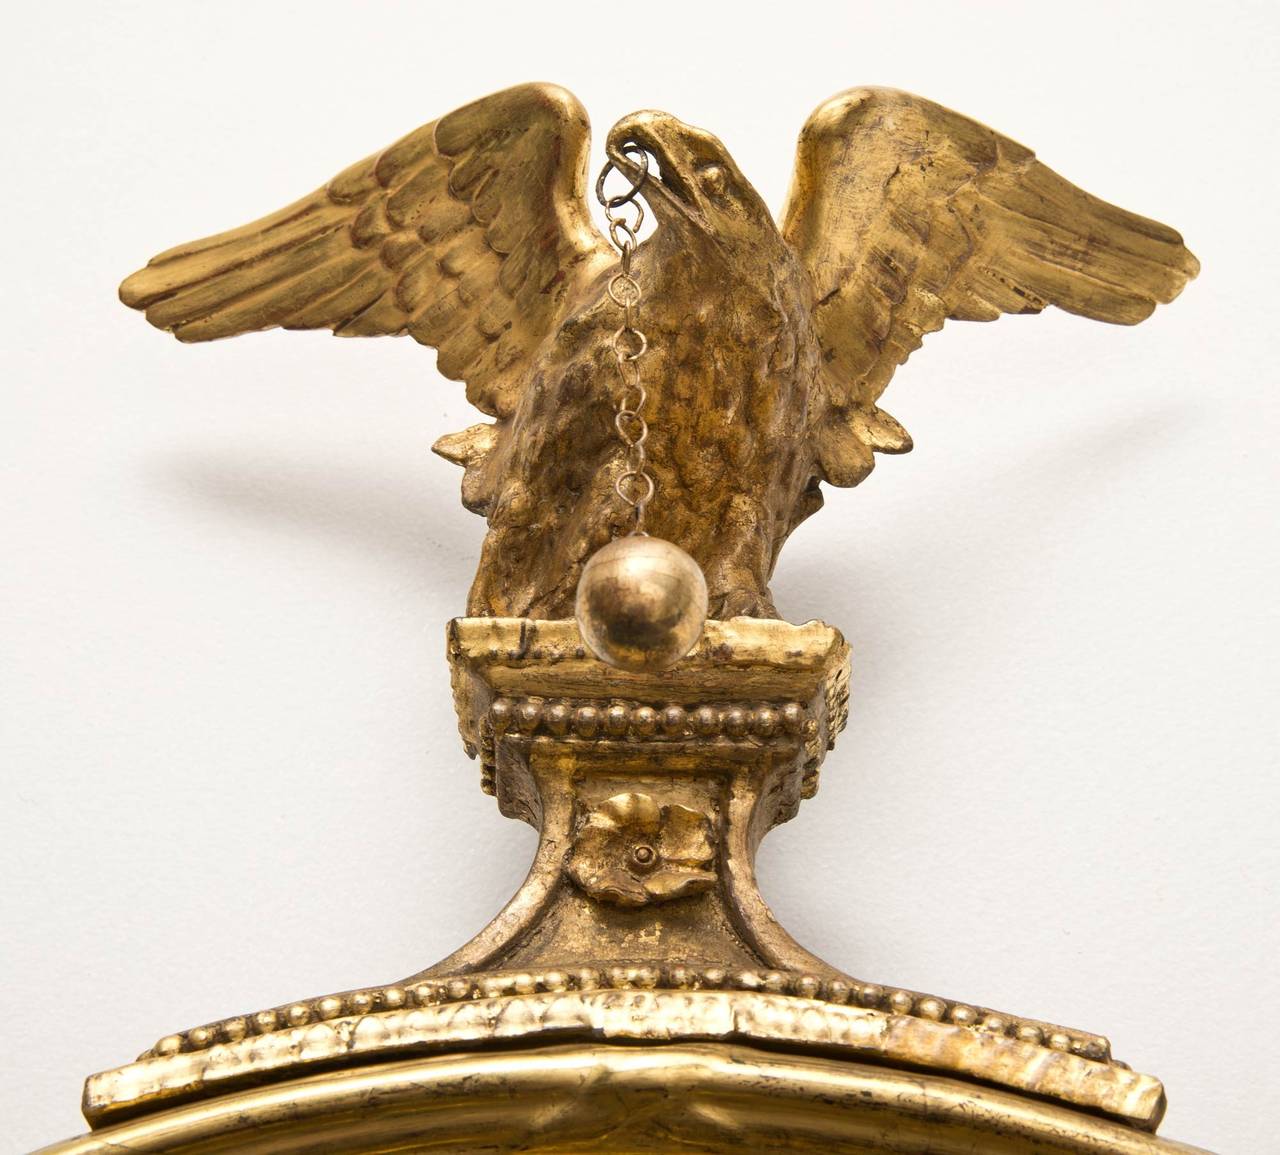 A fine Regency giltwood convex mirror with an ebonized slip, the inner border with tiny beading, the outer border with larger beading, surmounted by an eagle with outspread wings perched on a plinth, a ball and chain hanging from its beak.

Item